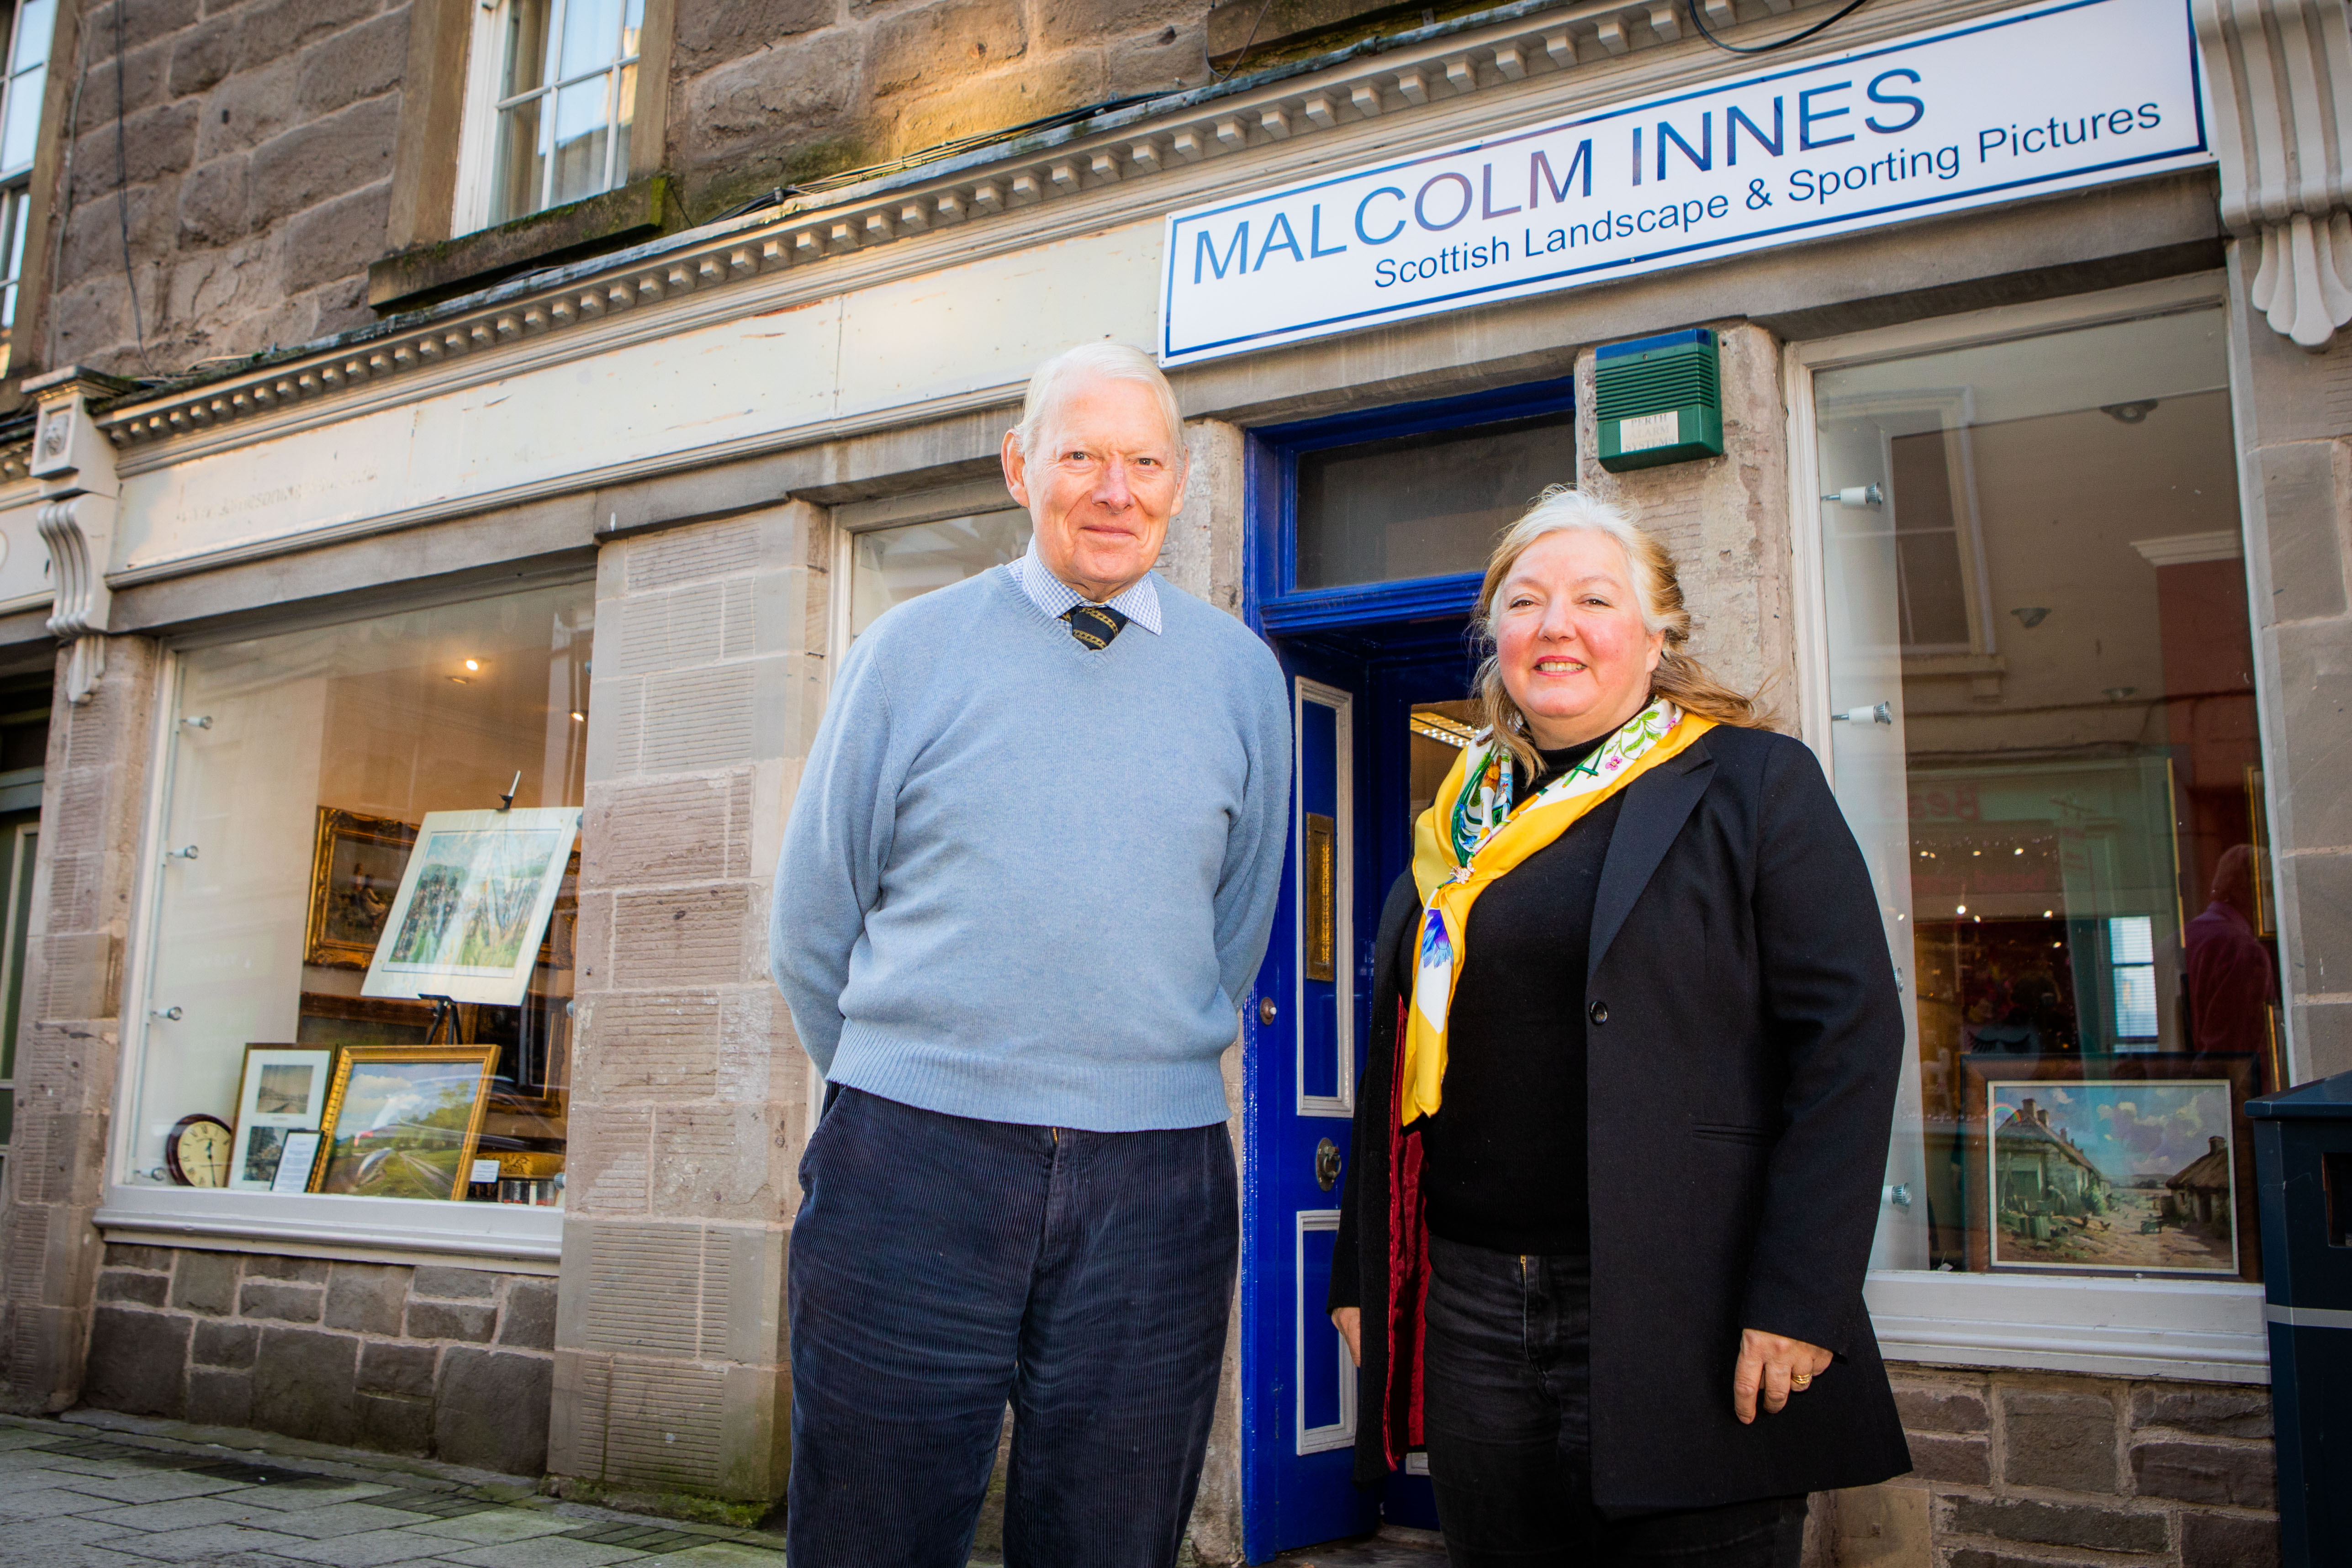 Malcolm Innes and Iona Drummond Moray